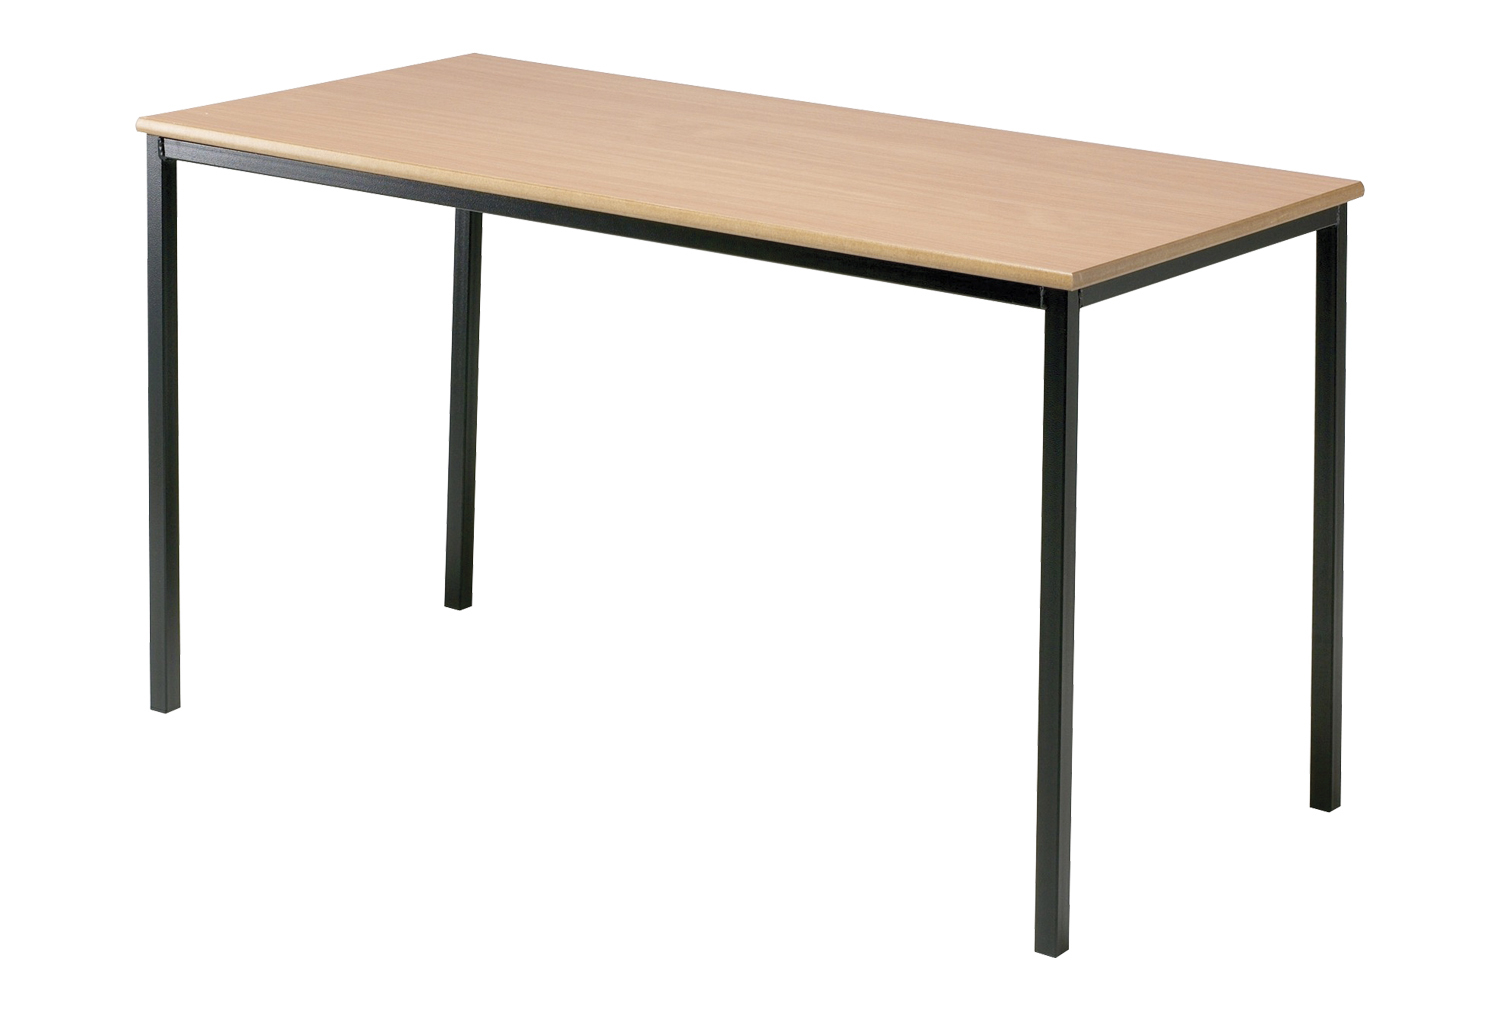 Qty 6 - Educate Fully Welded Rectangular Classroom Tables 14+ Years (MDF Edge), 120wx60d (cm), Charcoal Frame, Beech Top